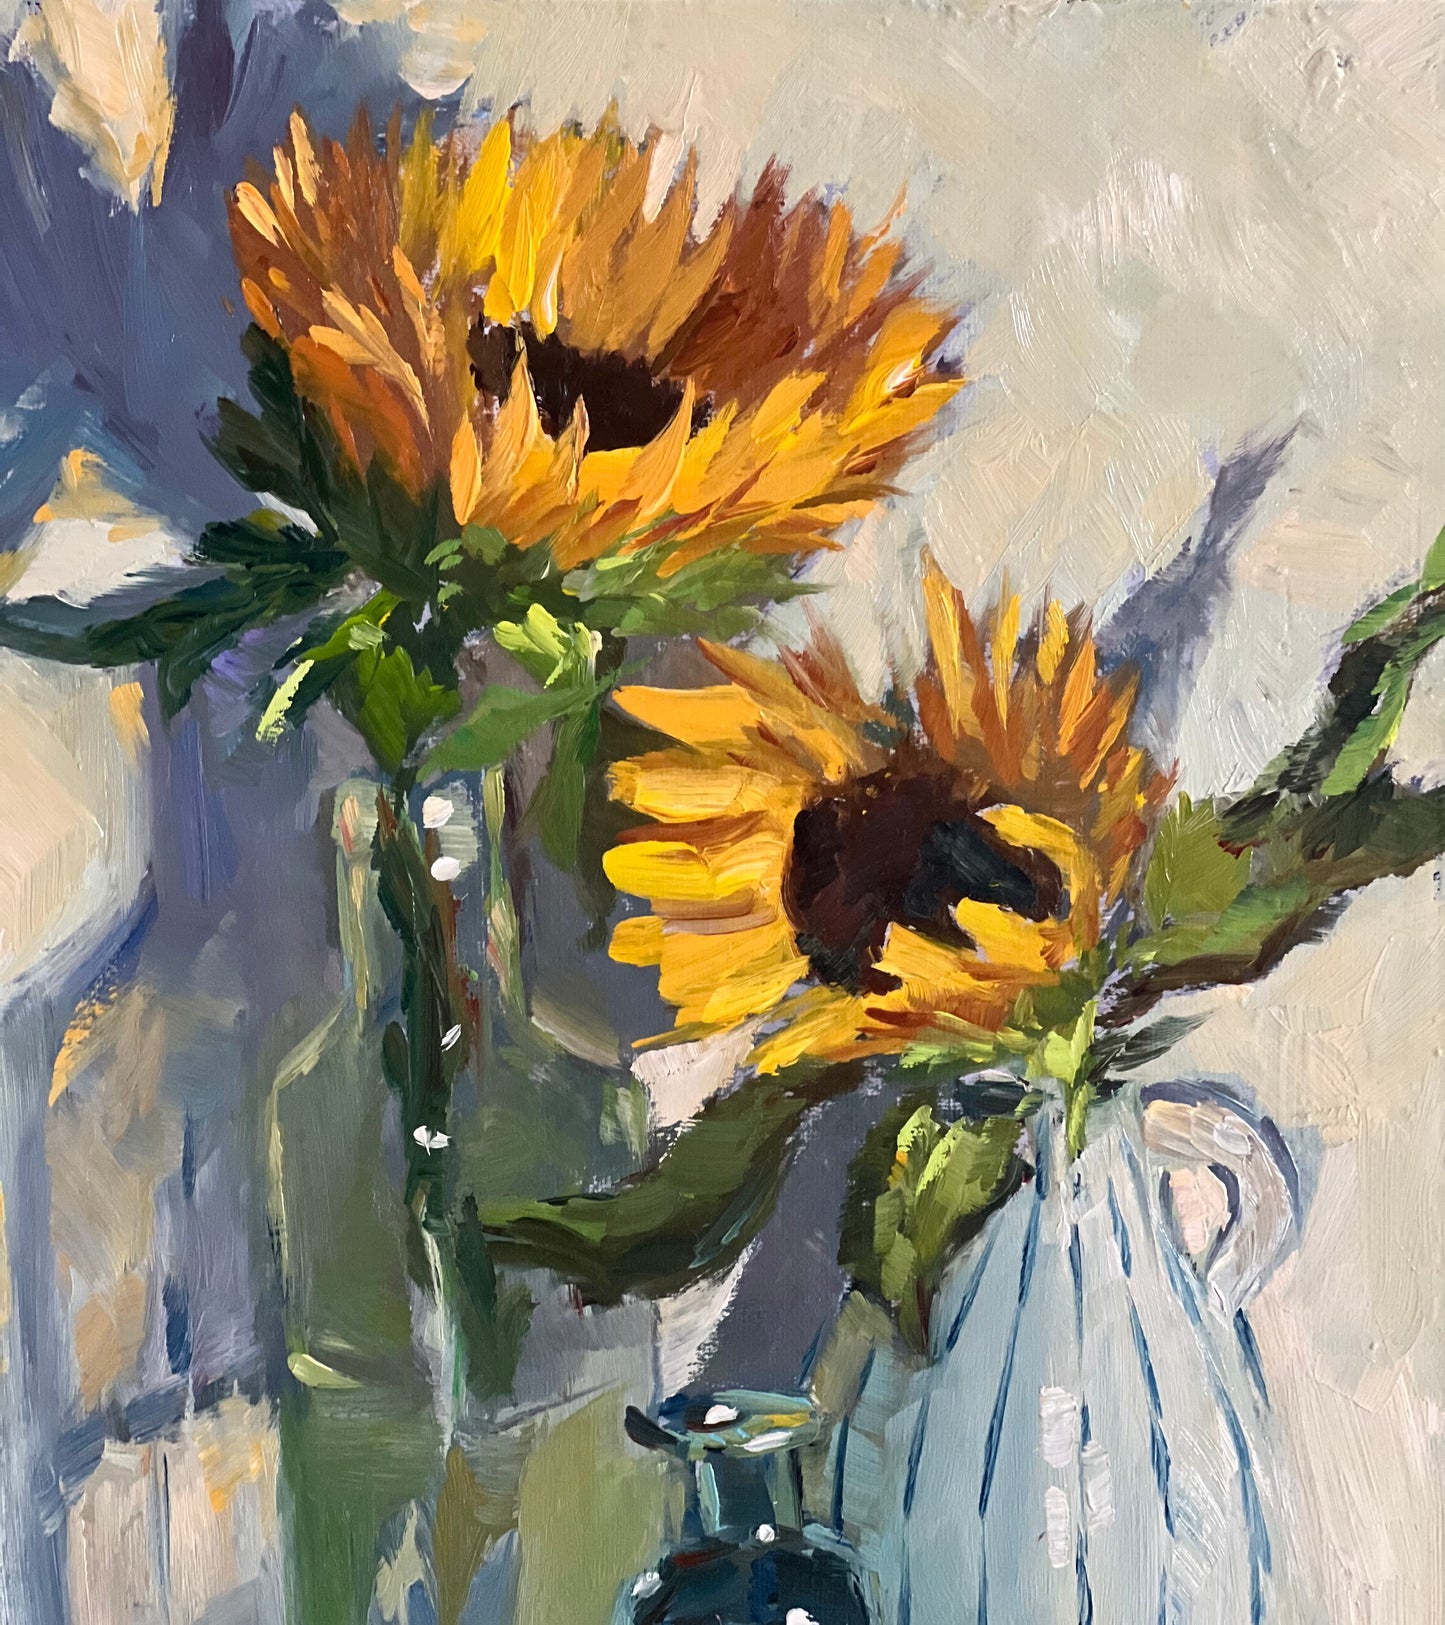 Sunflower Series 12 - Original Stilllife Painting, 8 by 12 inches